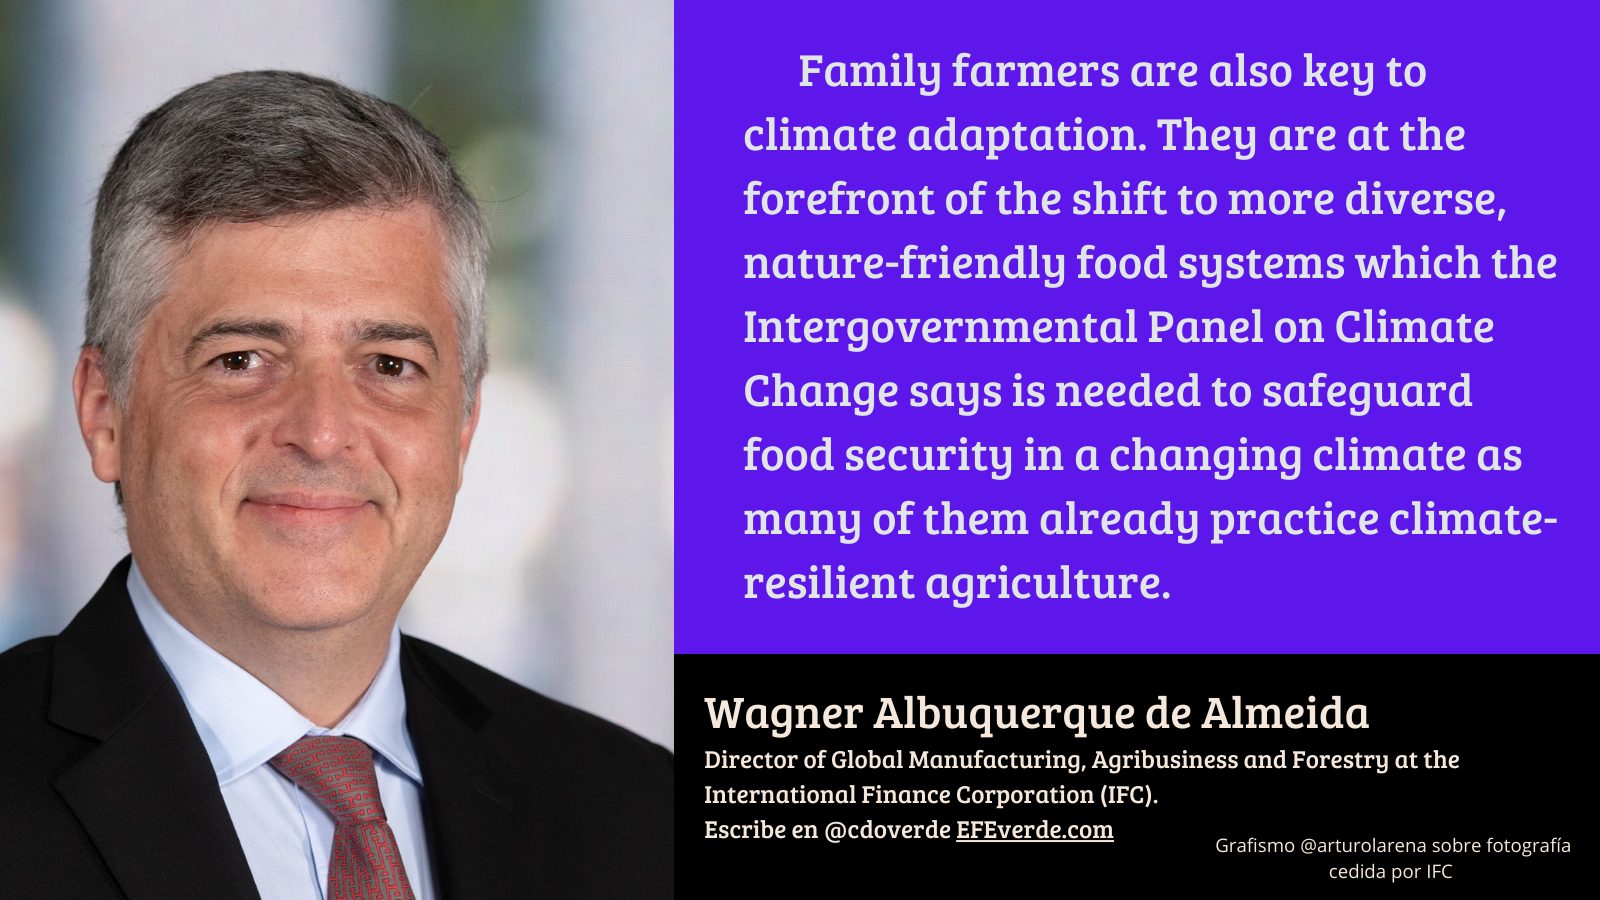 Wagner Albuquerque de Almeida is the Director of Global Manufacturing‚ Agribusiness and Forestry at the International Finance Corporation.